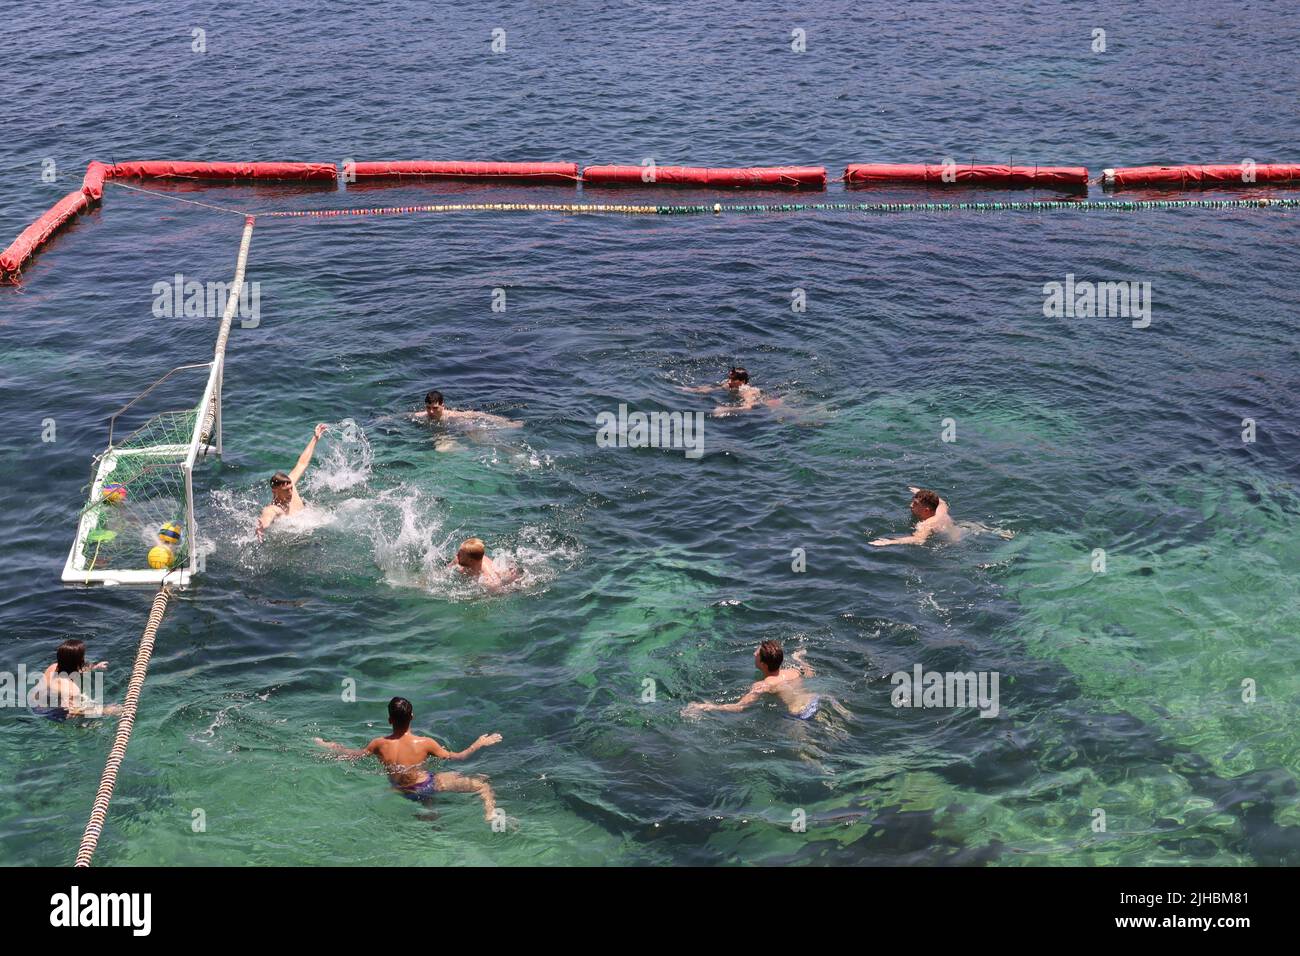 GOAL!! Water polo players during a training session in a sectioned off part of the bay at Marsalforn, Gozo, Malta Stock Photo